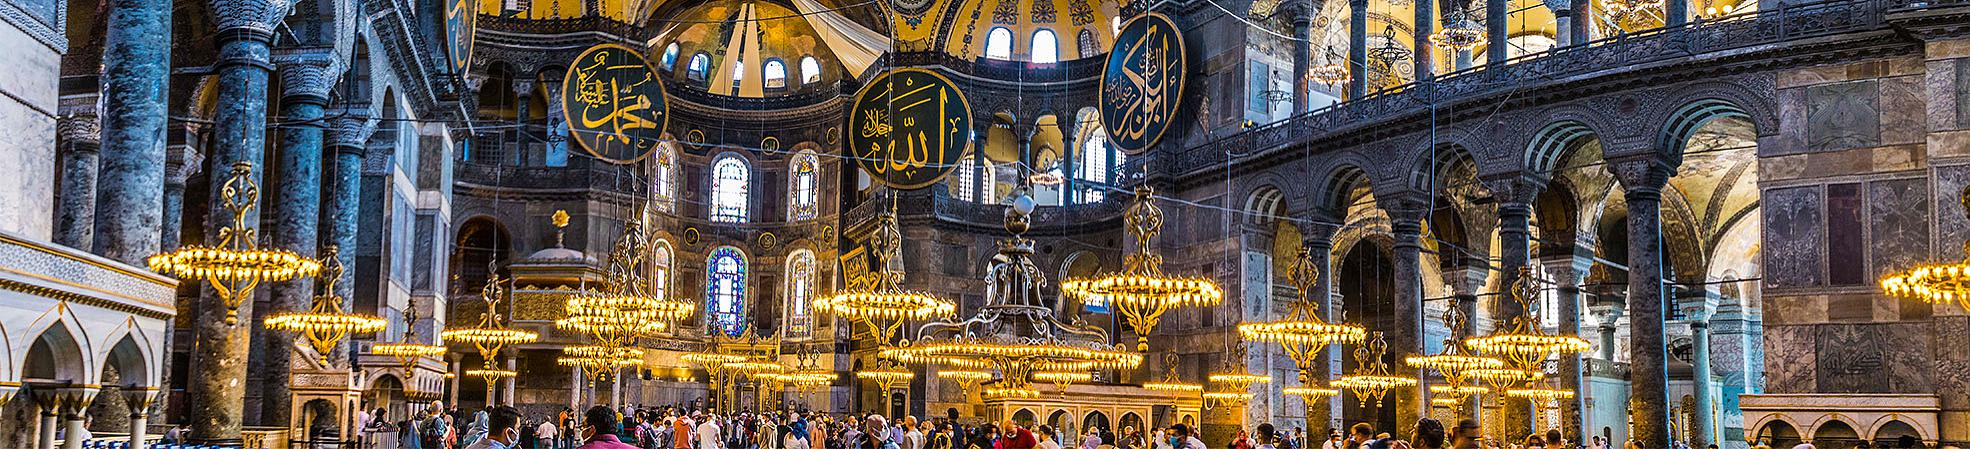 Top 10 Places to Visit in Turkey for the First Time